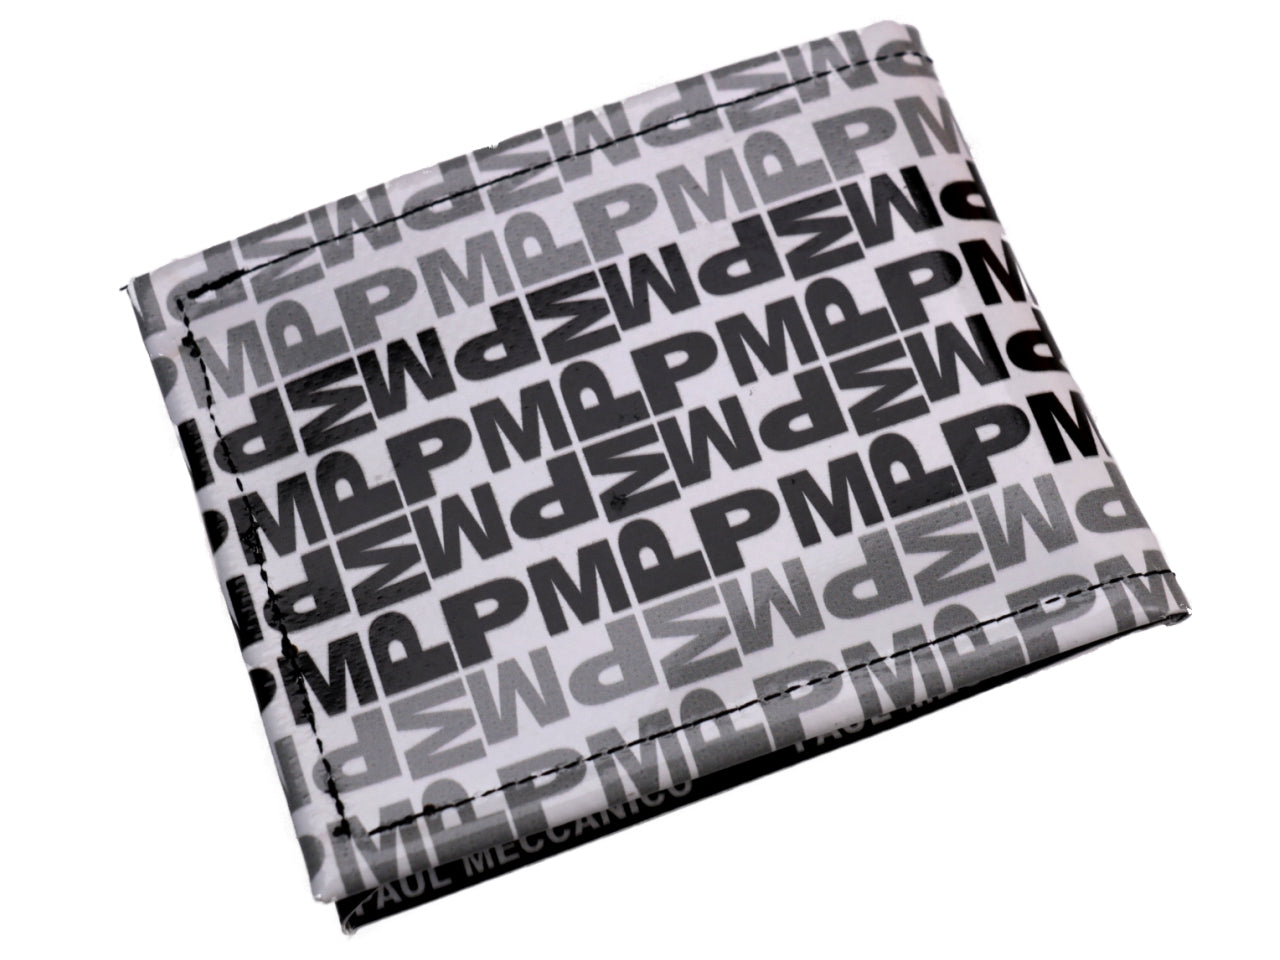 MEN'S WALLET BLACK AND WHITE LETTERING FANTASY. MODEL CRIK MADE OF LORRY TARPAULIN. - Limited Edition Paul Meccanico